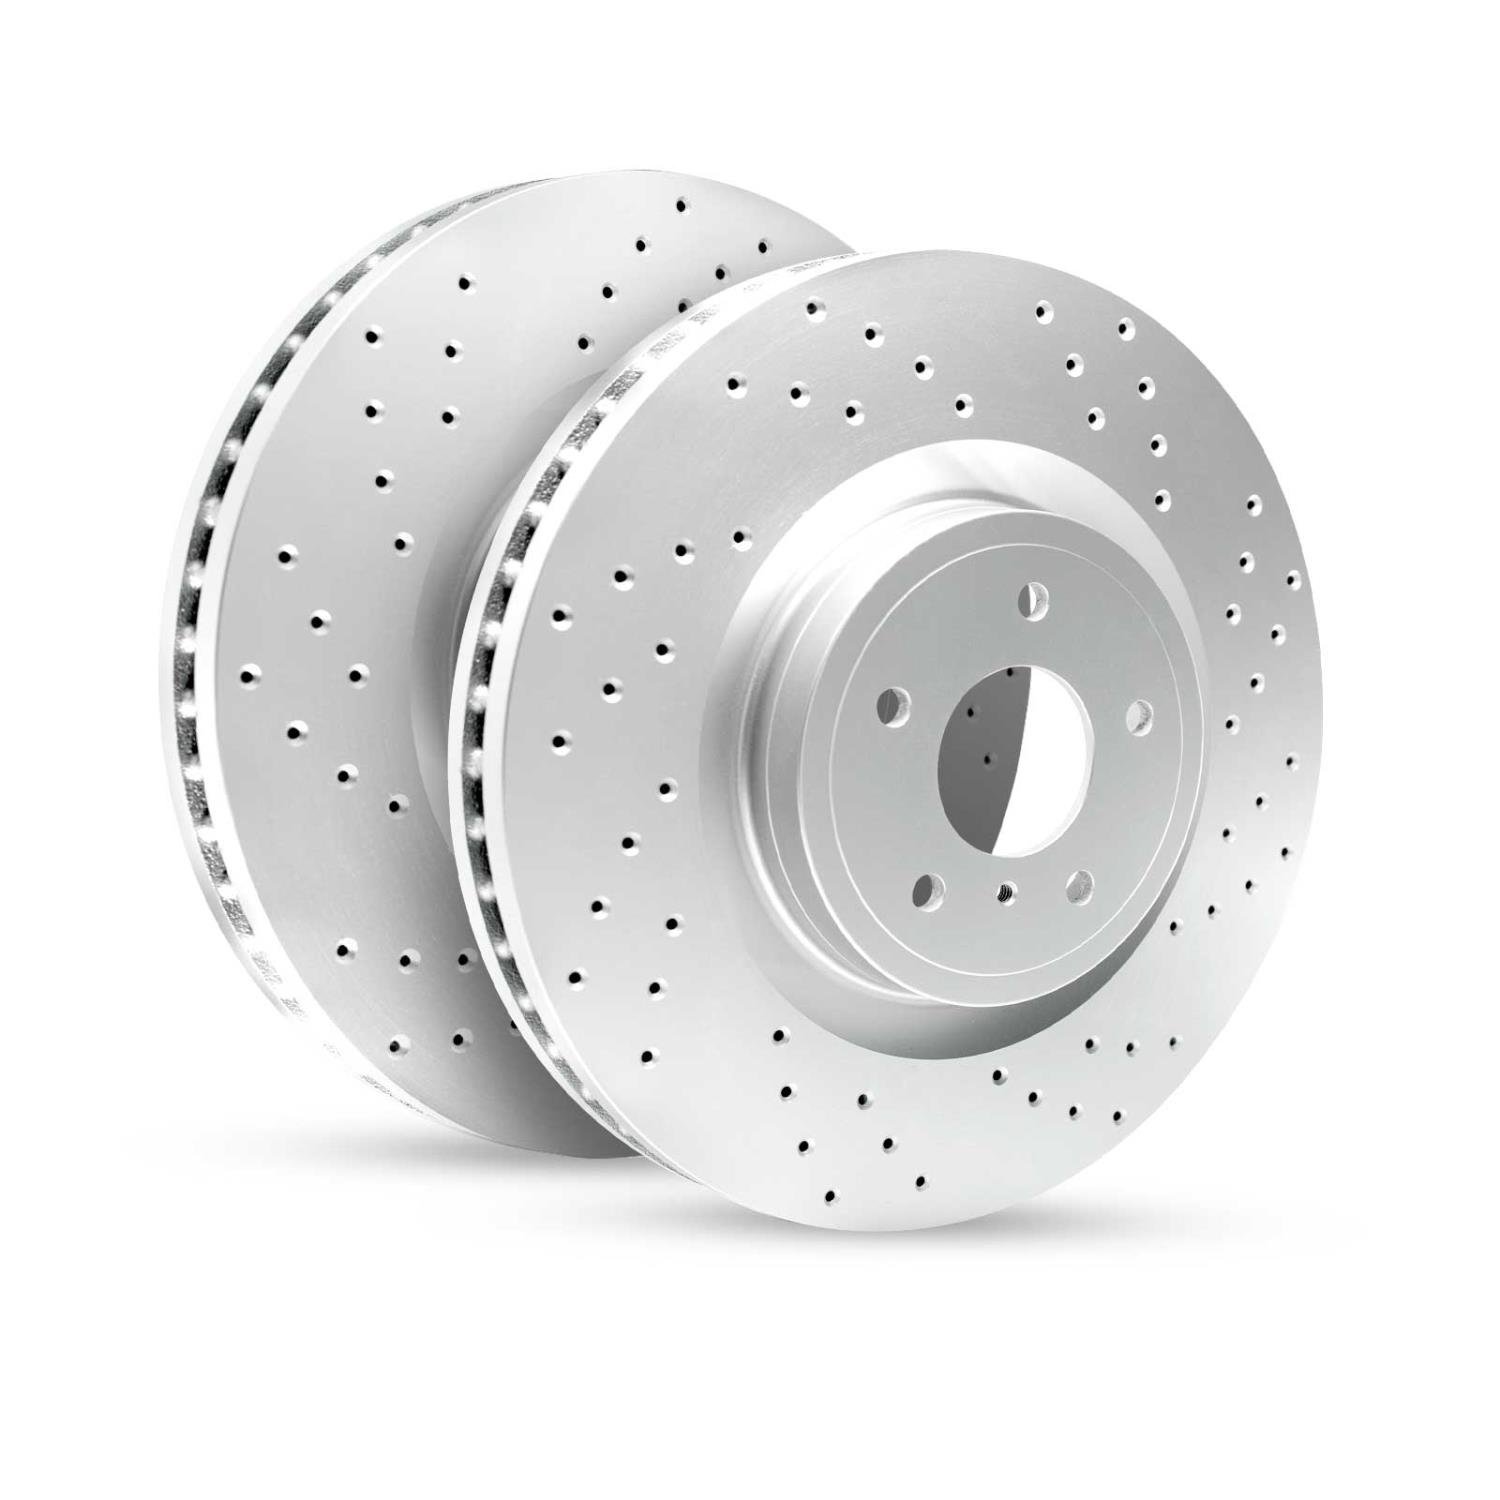 GEO-Carbon Drilled/Slotted Rotors, 2012-2020 Fits Multiple Makes/Models, Position: Rear